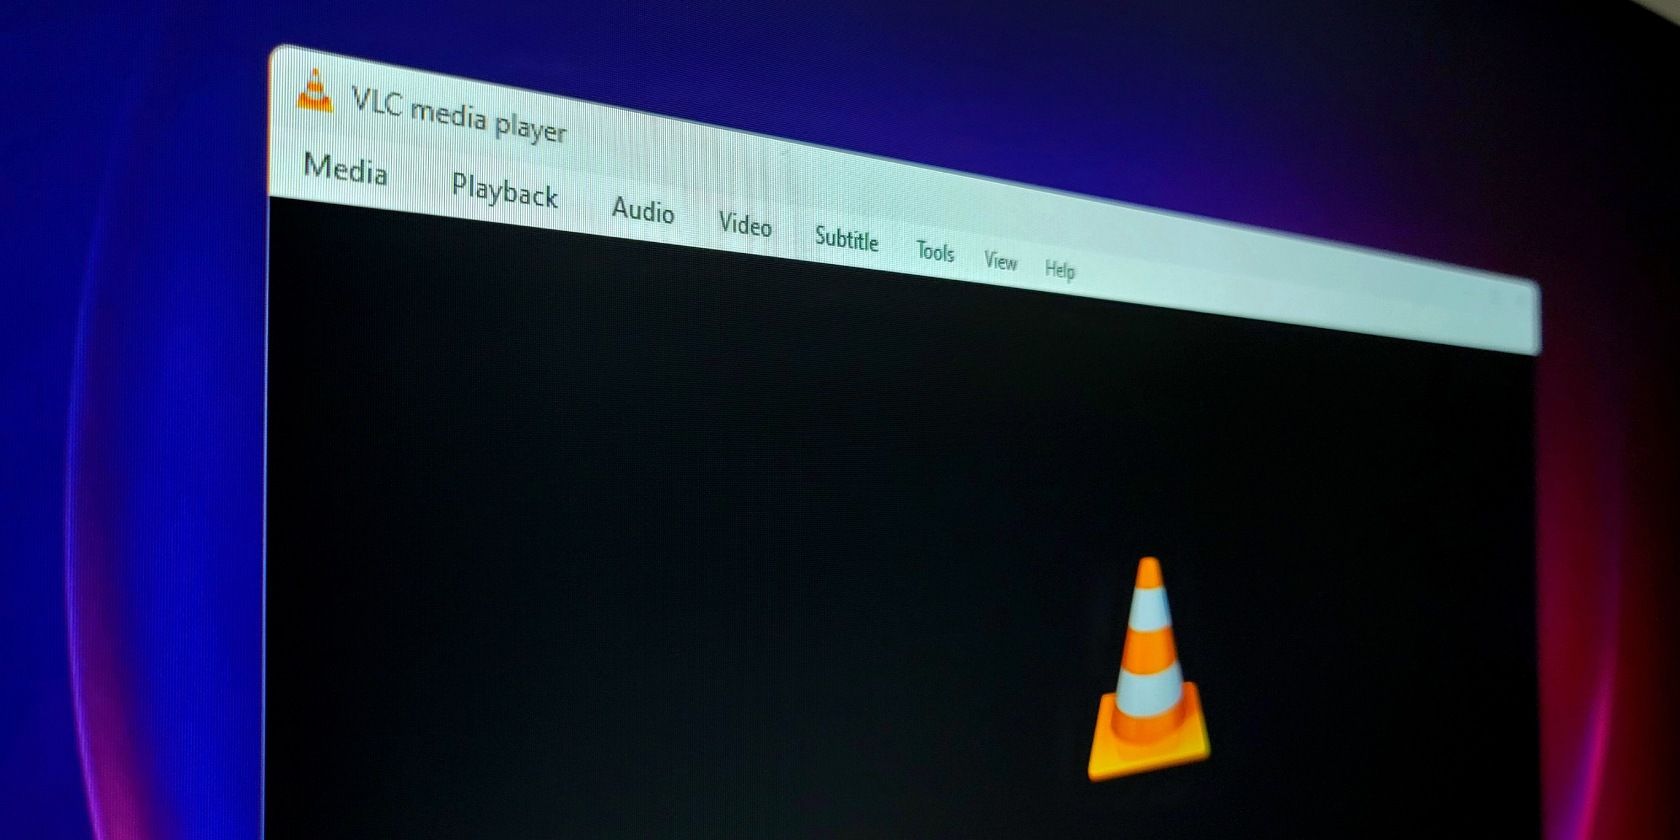 input cant be opened vlc error